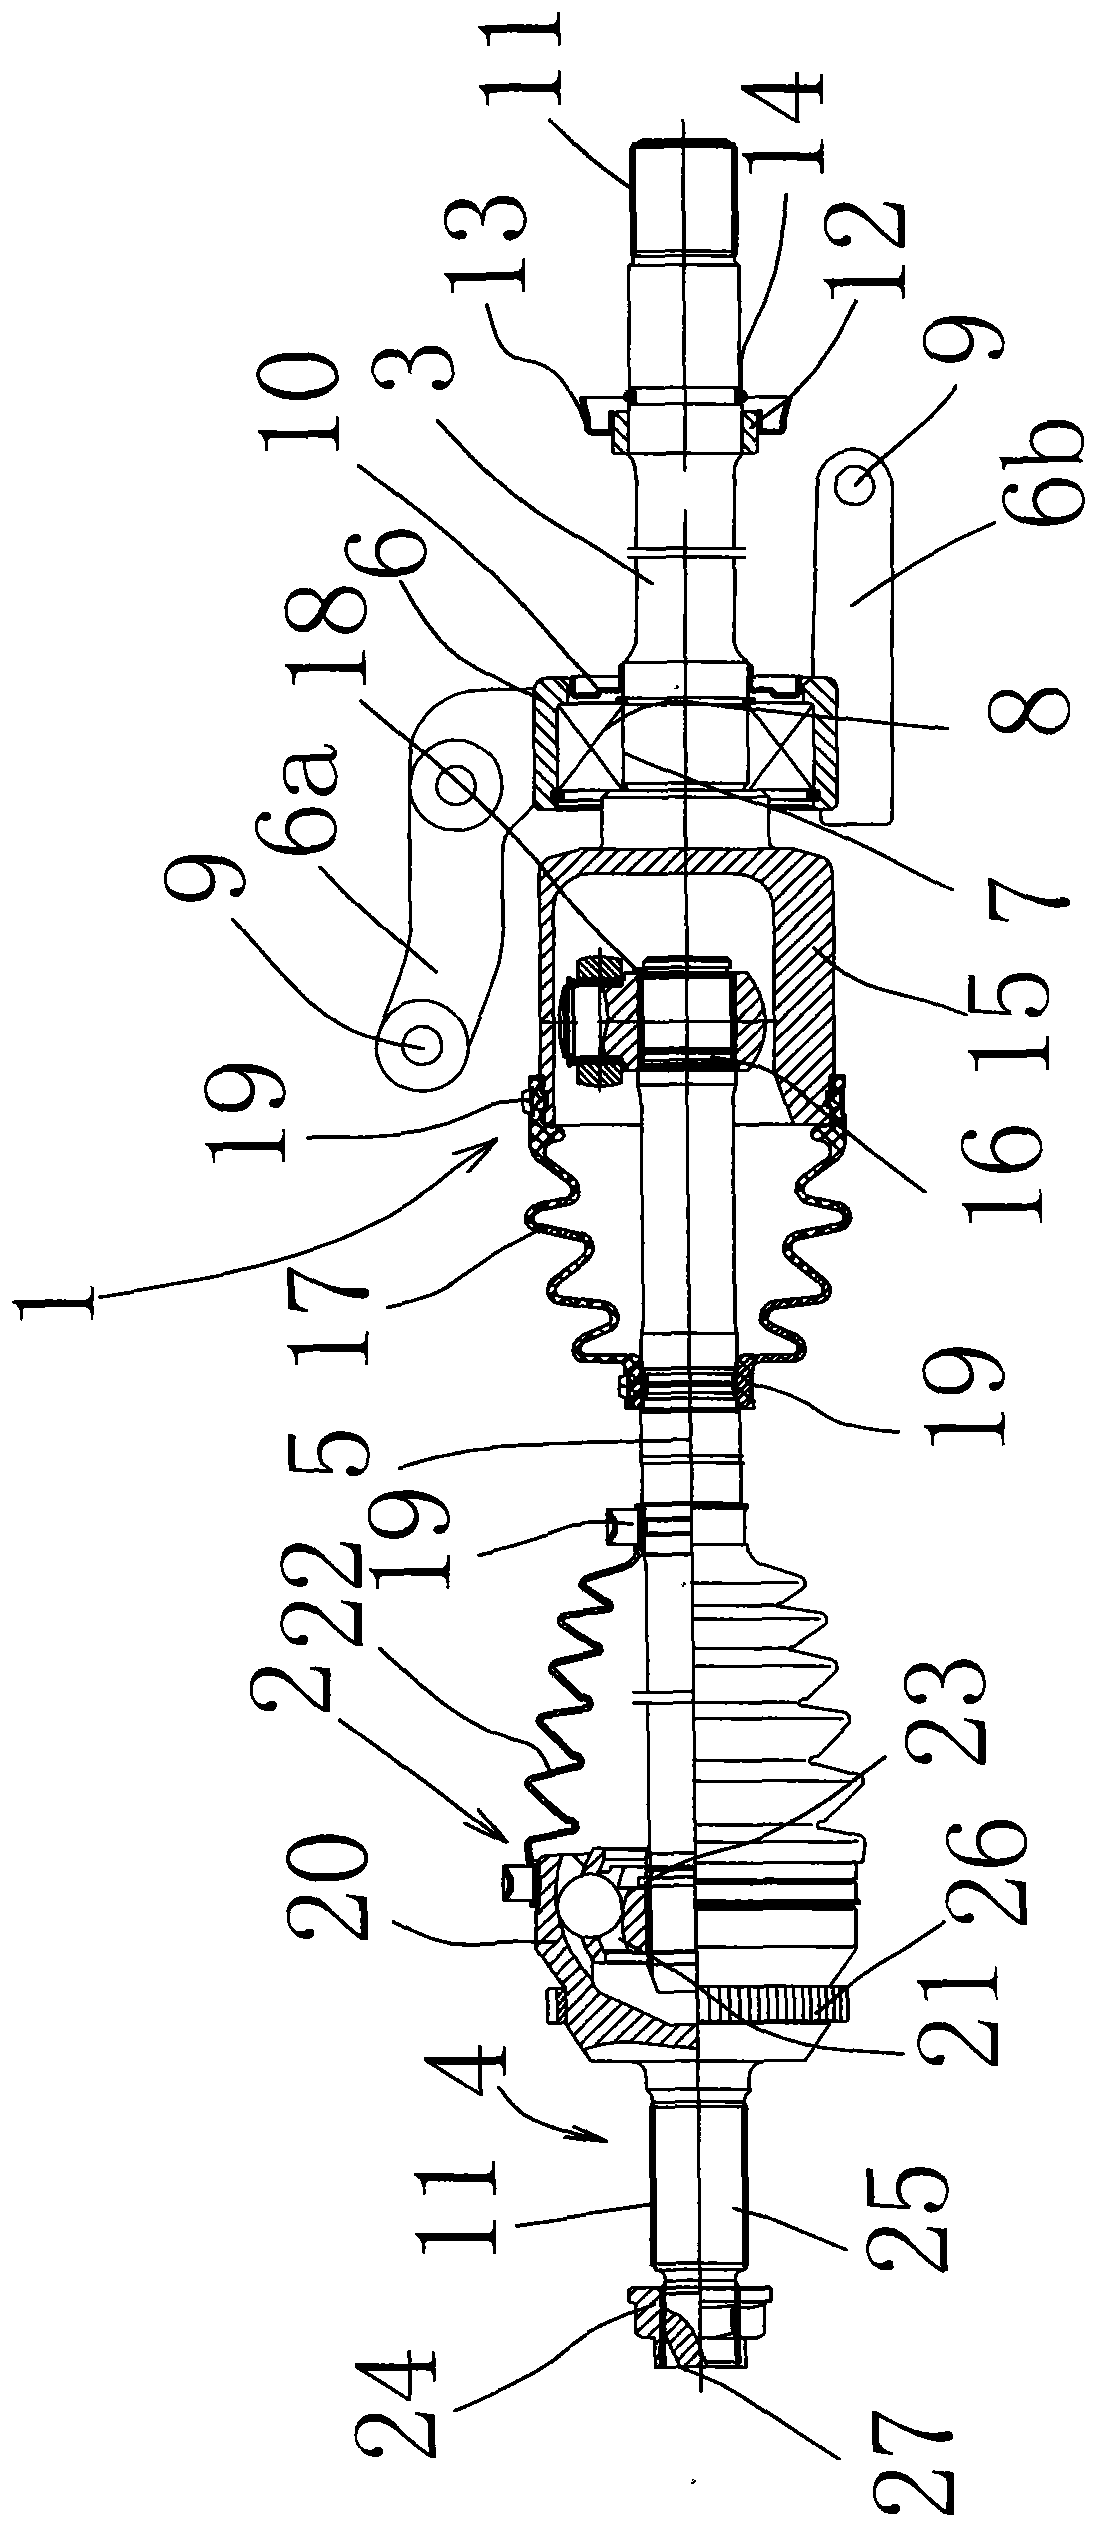 Input bending angle structure of driving axle assembly